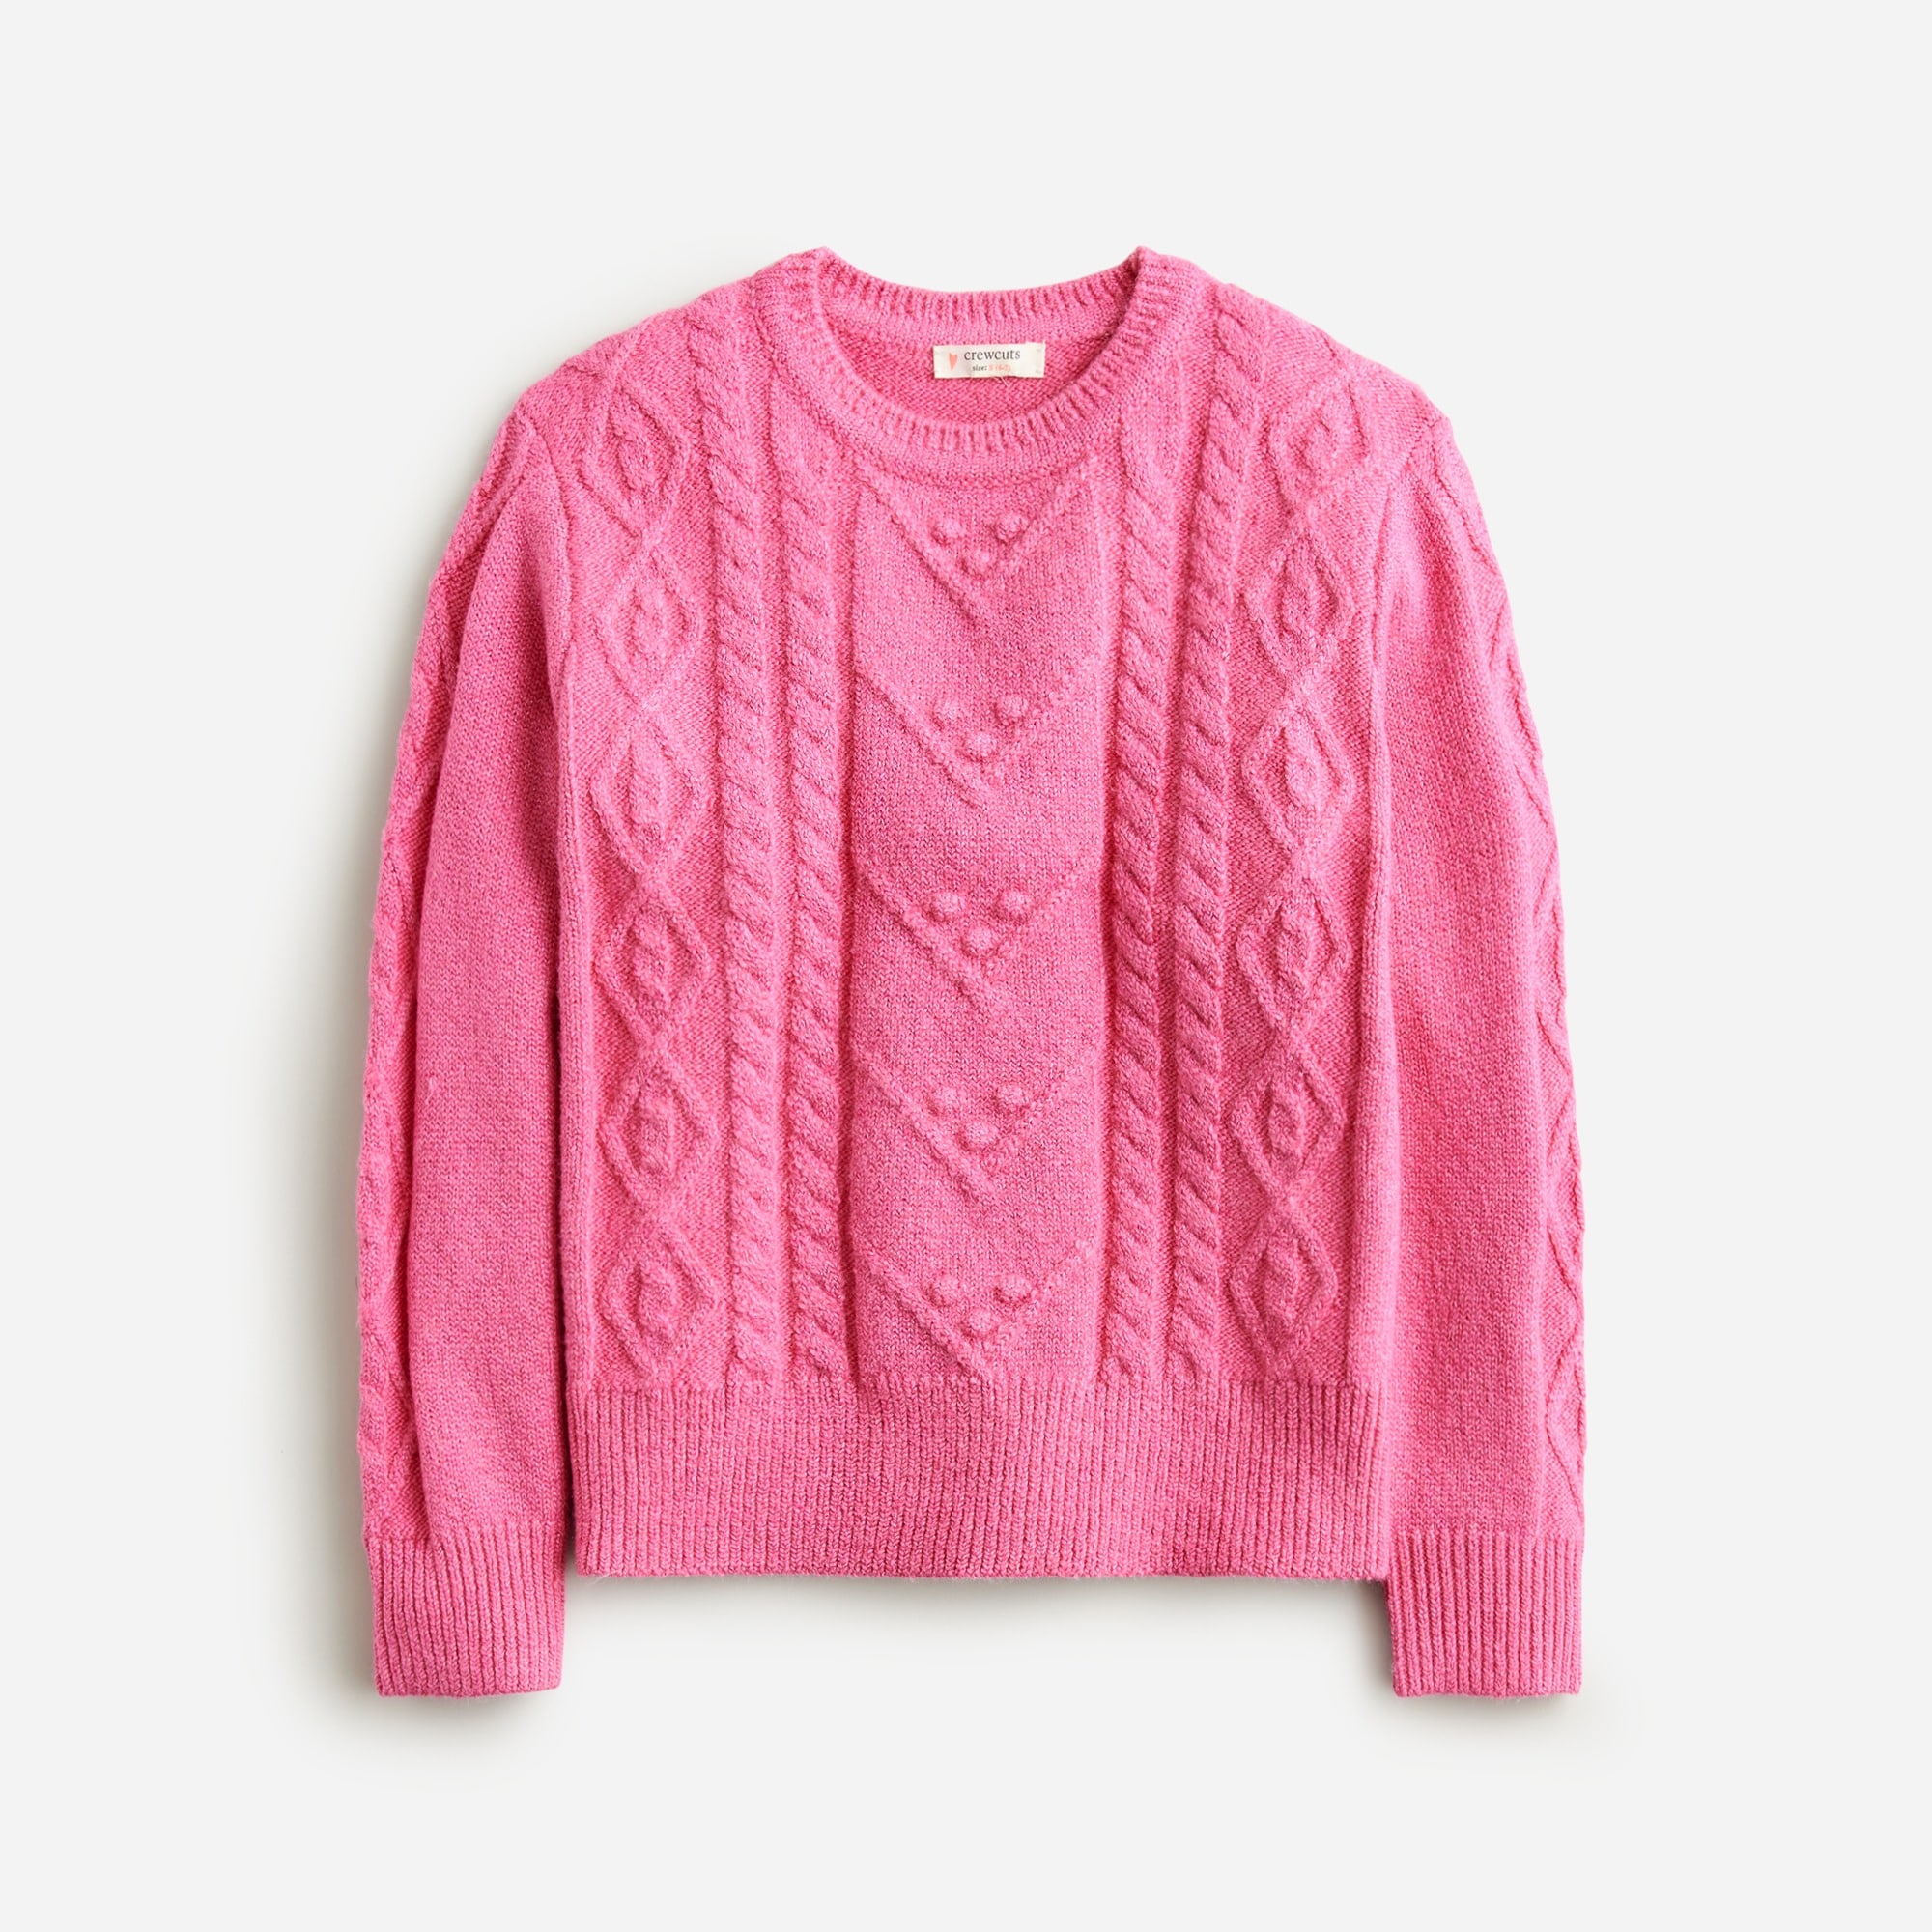 Jcrew Girls sparkle cable-knit sweater